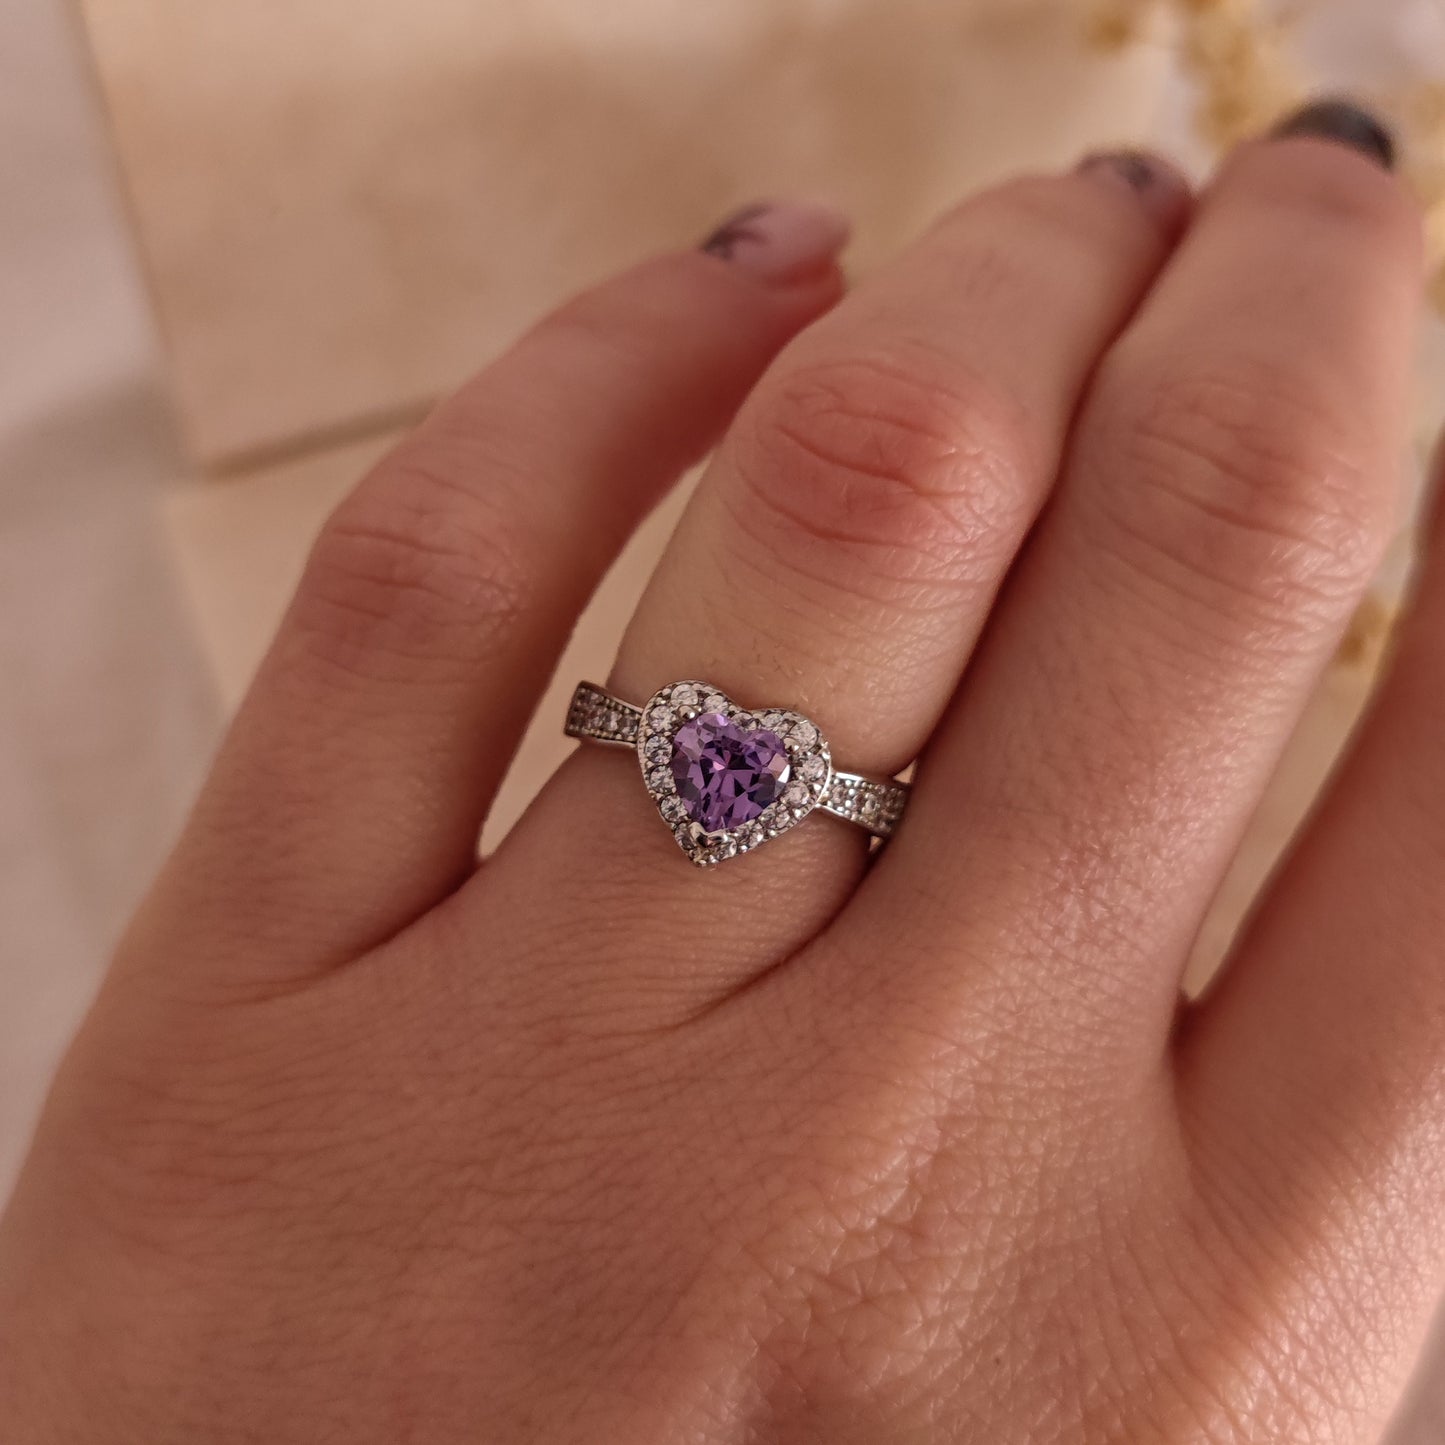 Crystal Heart Engagement Ring, Lilac